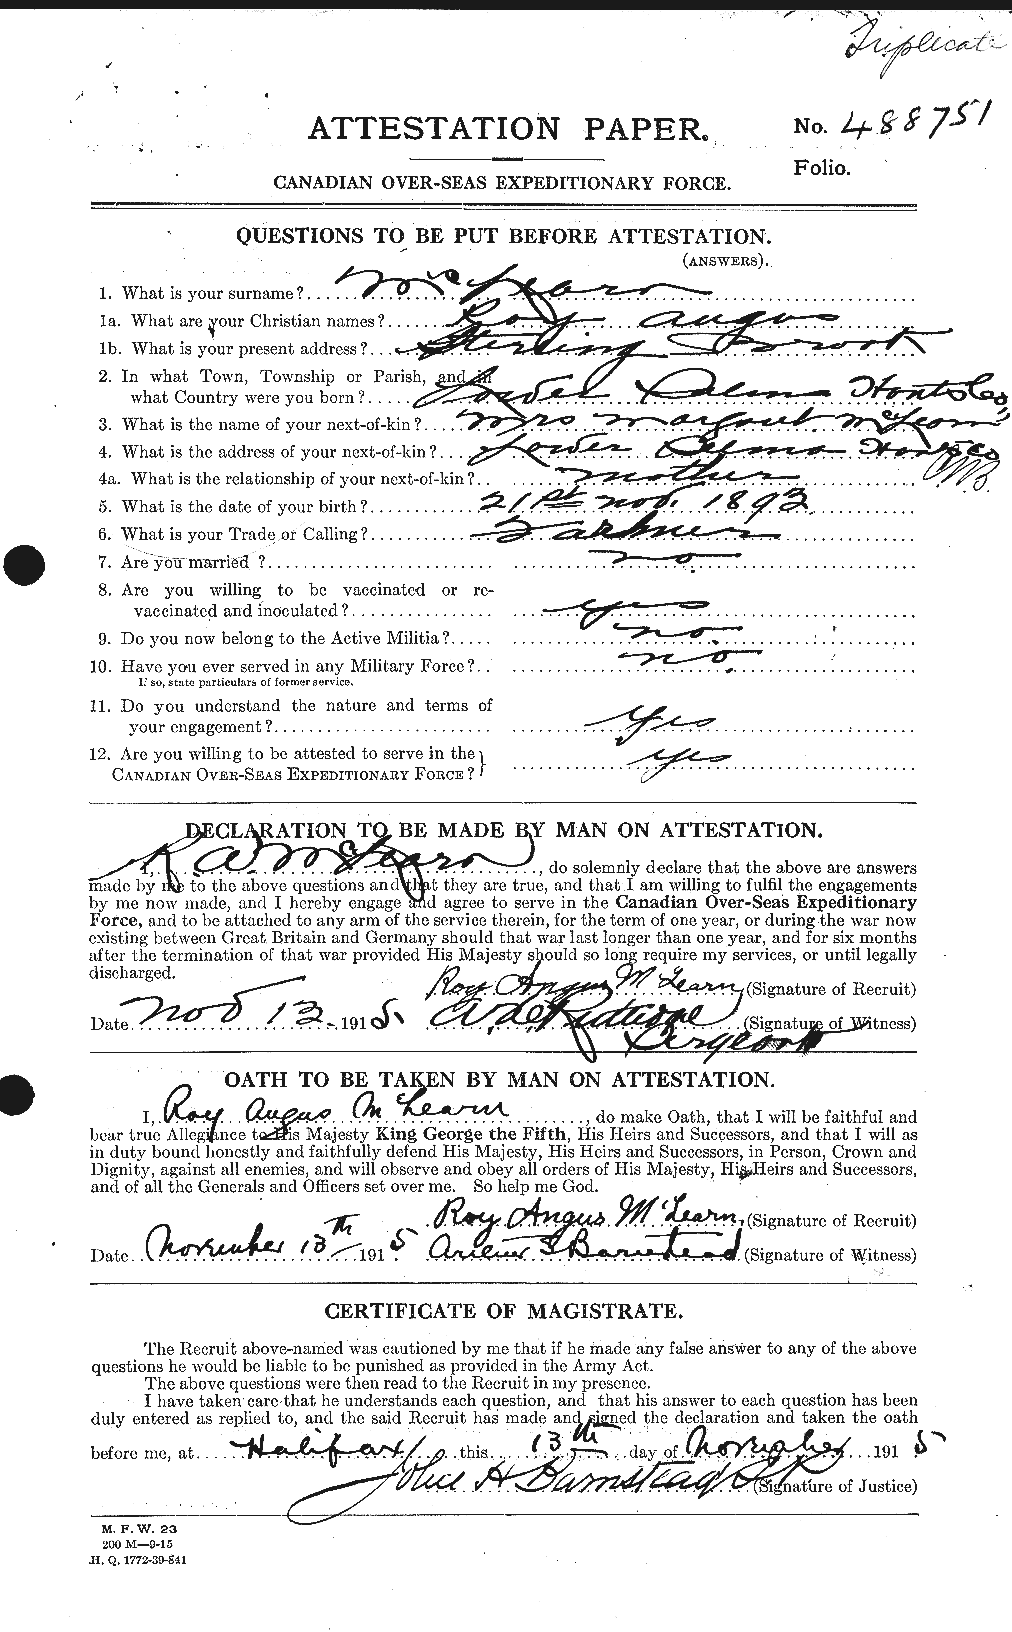 Personnel Records of the First World War - CEF 535291a